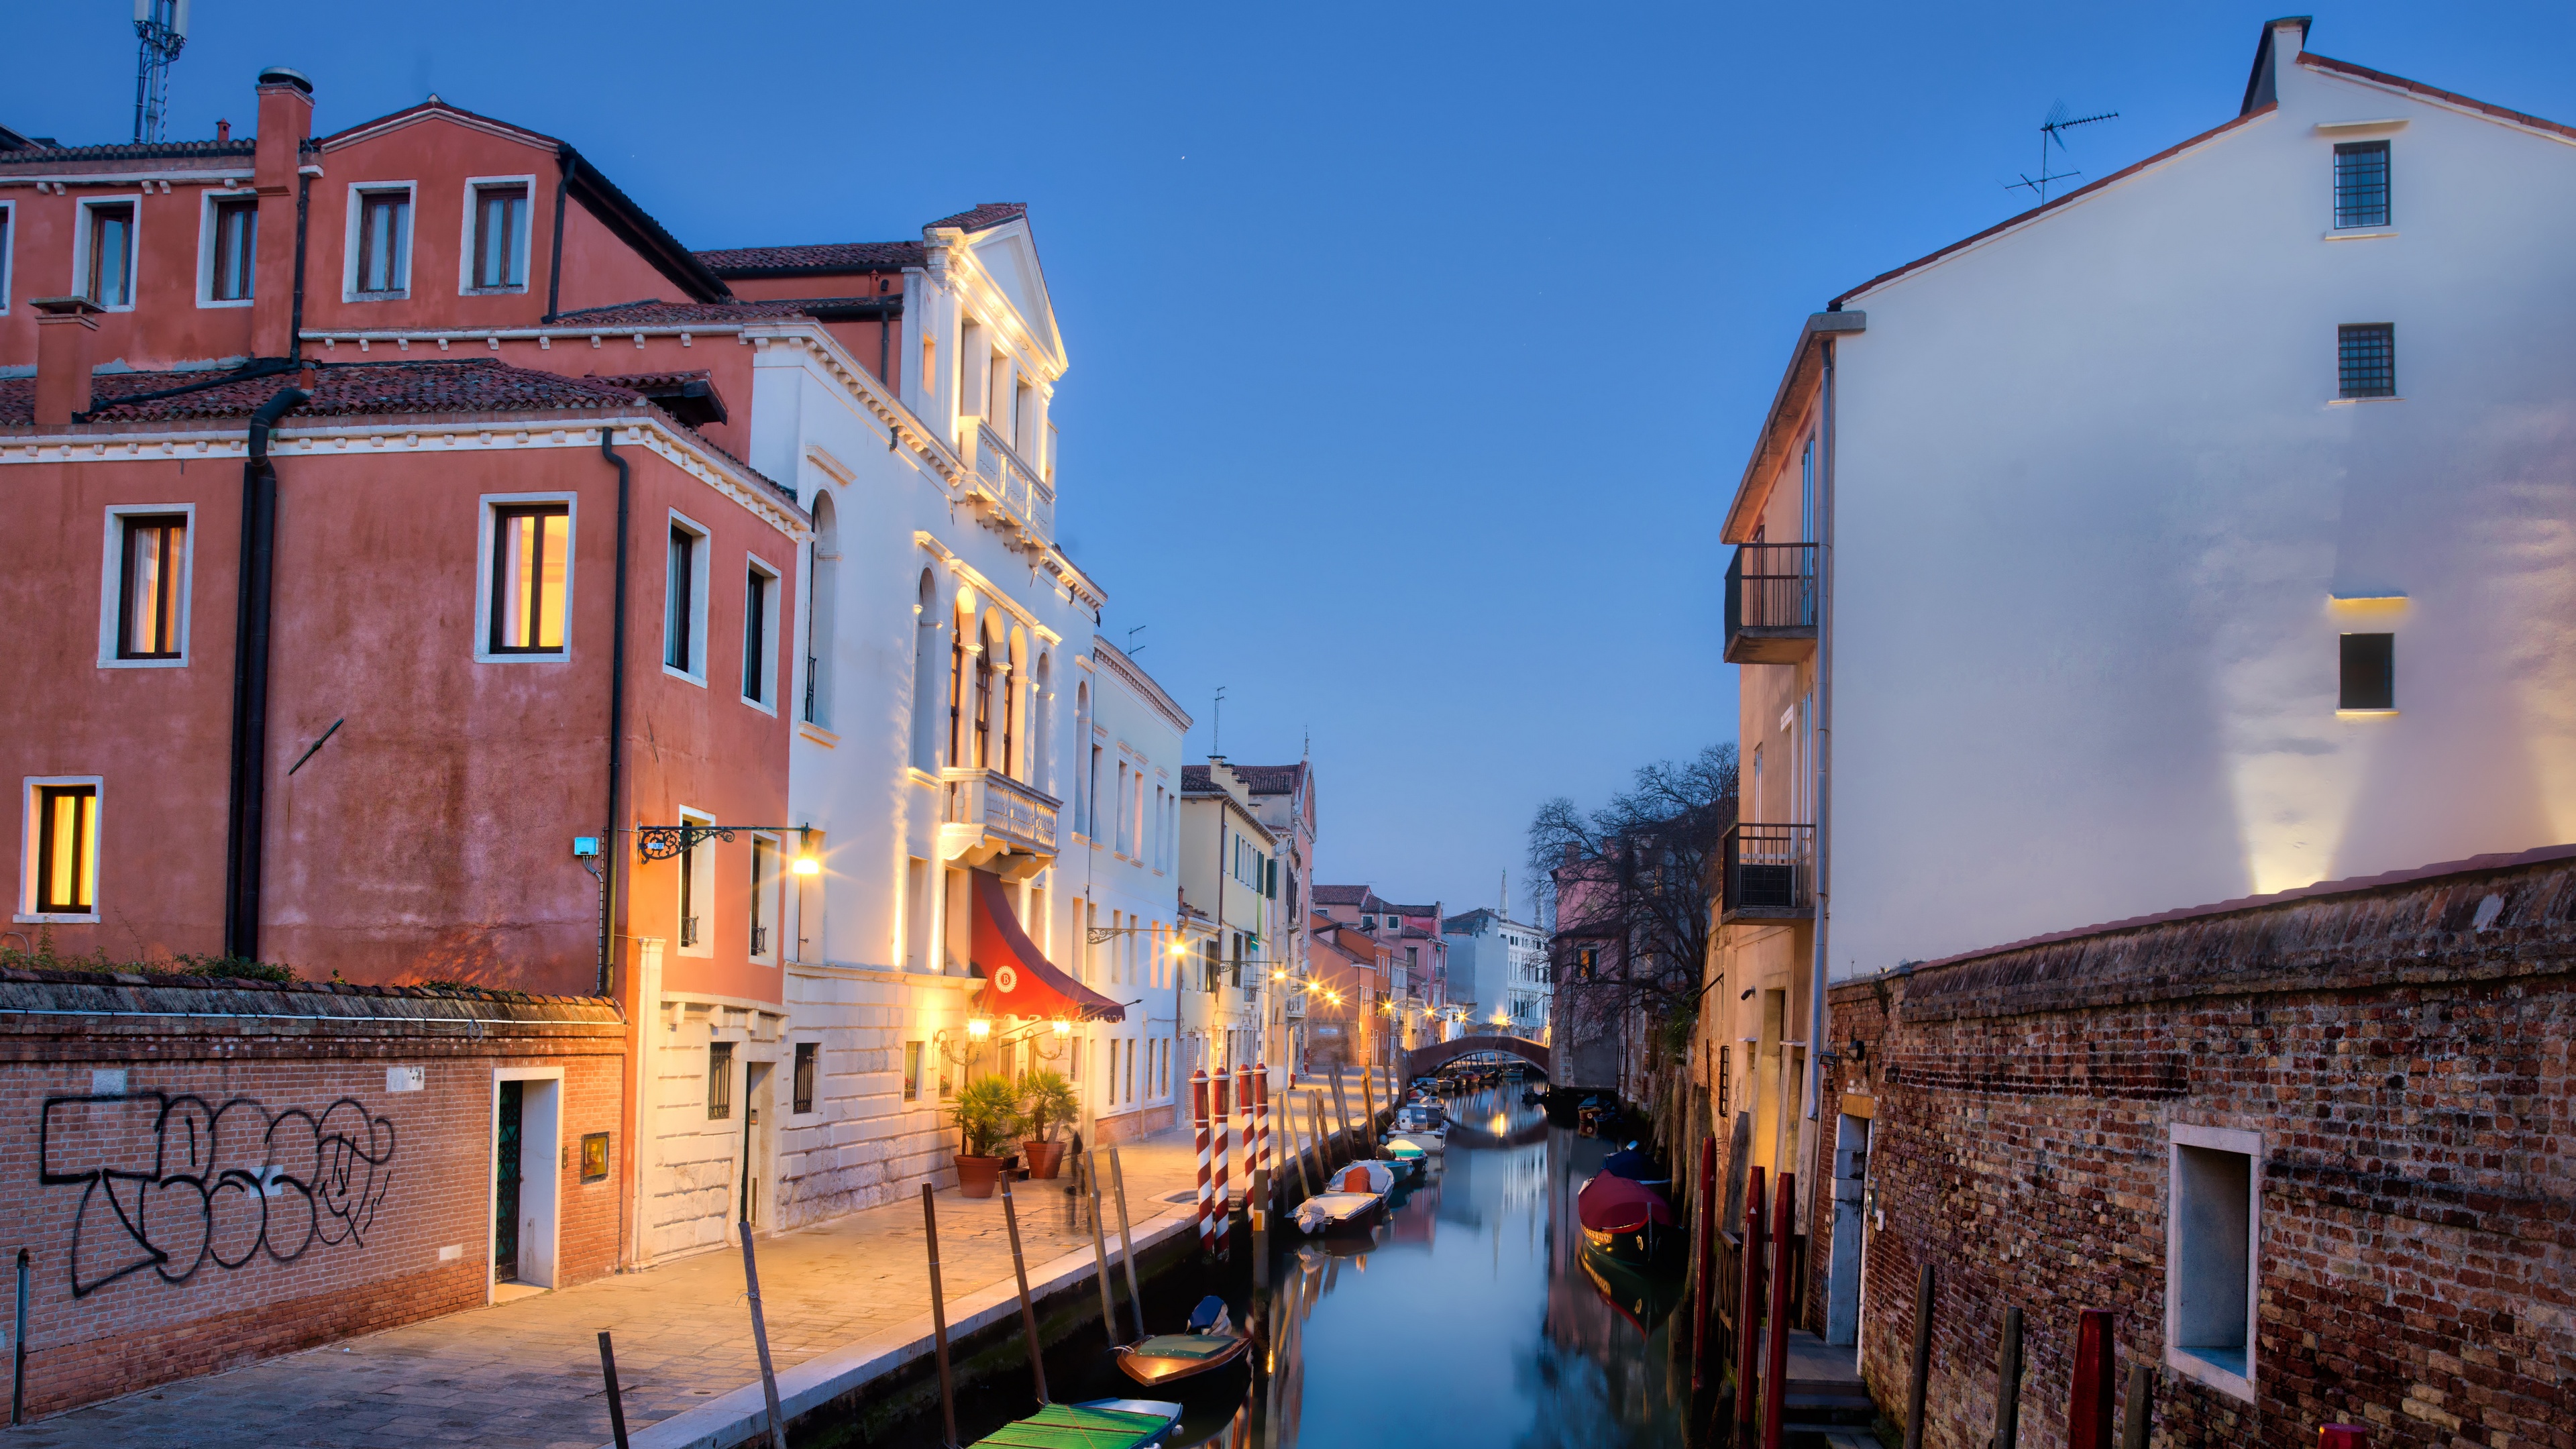 General 3840x2160 Trey Ratcliff photography Italy Venice cityscape building house water canal boat lights bridge street light 4K